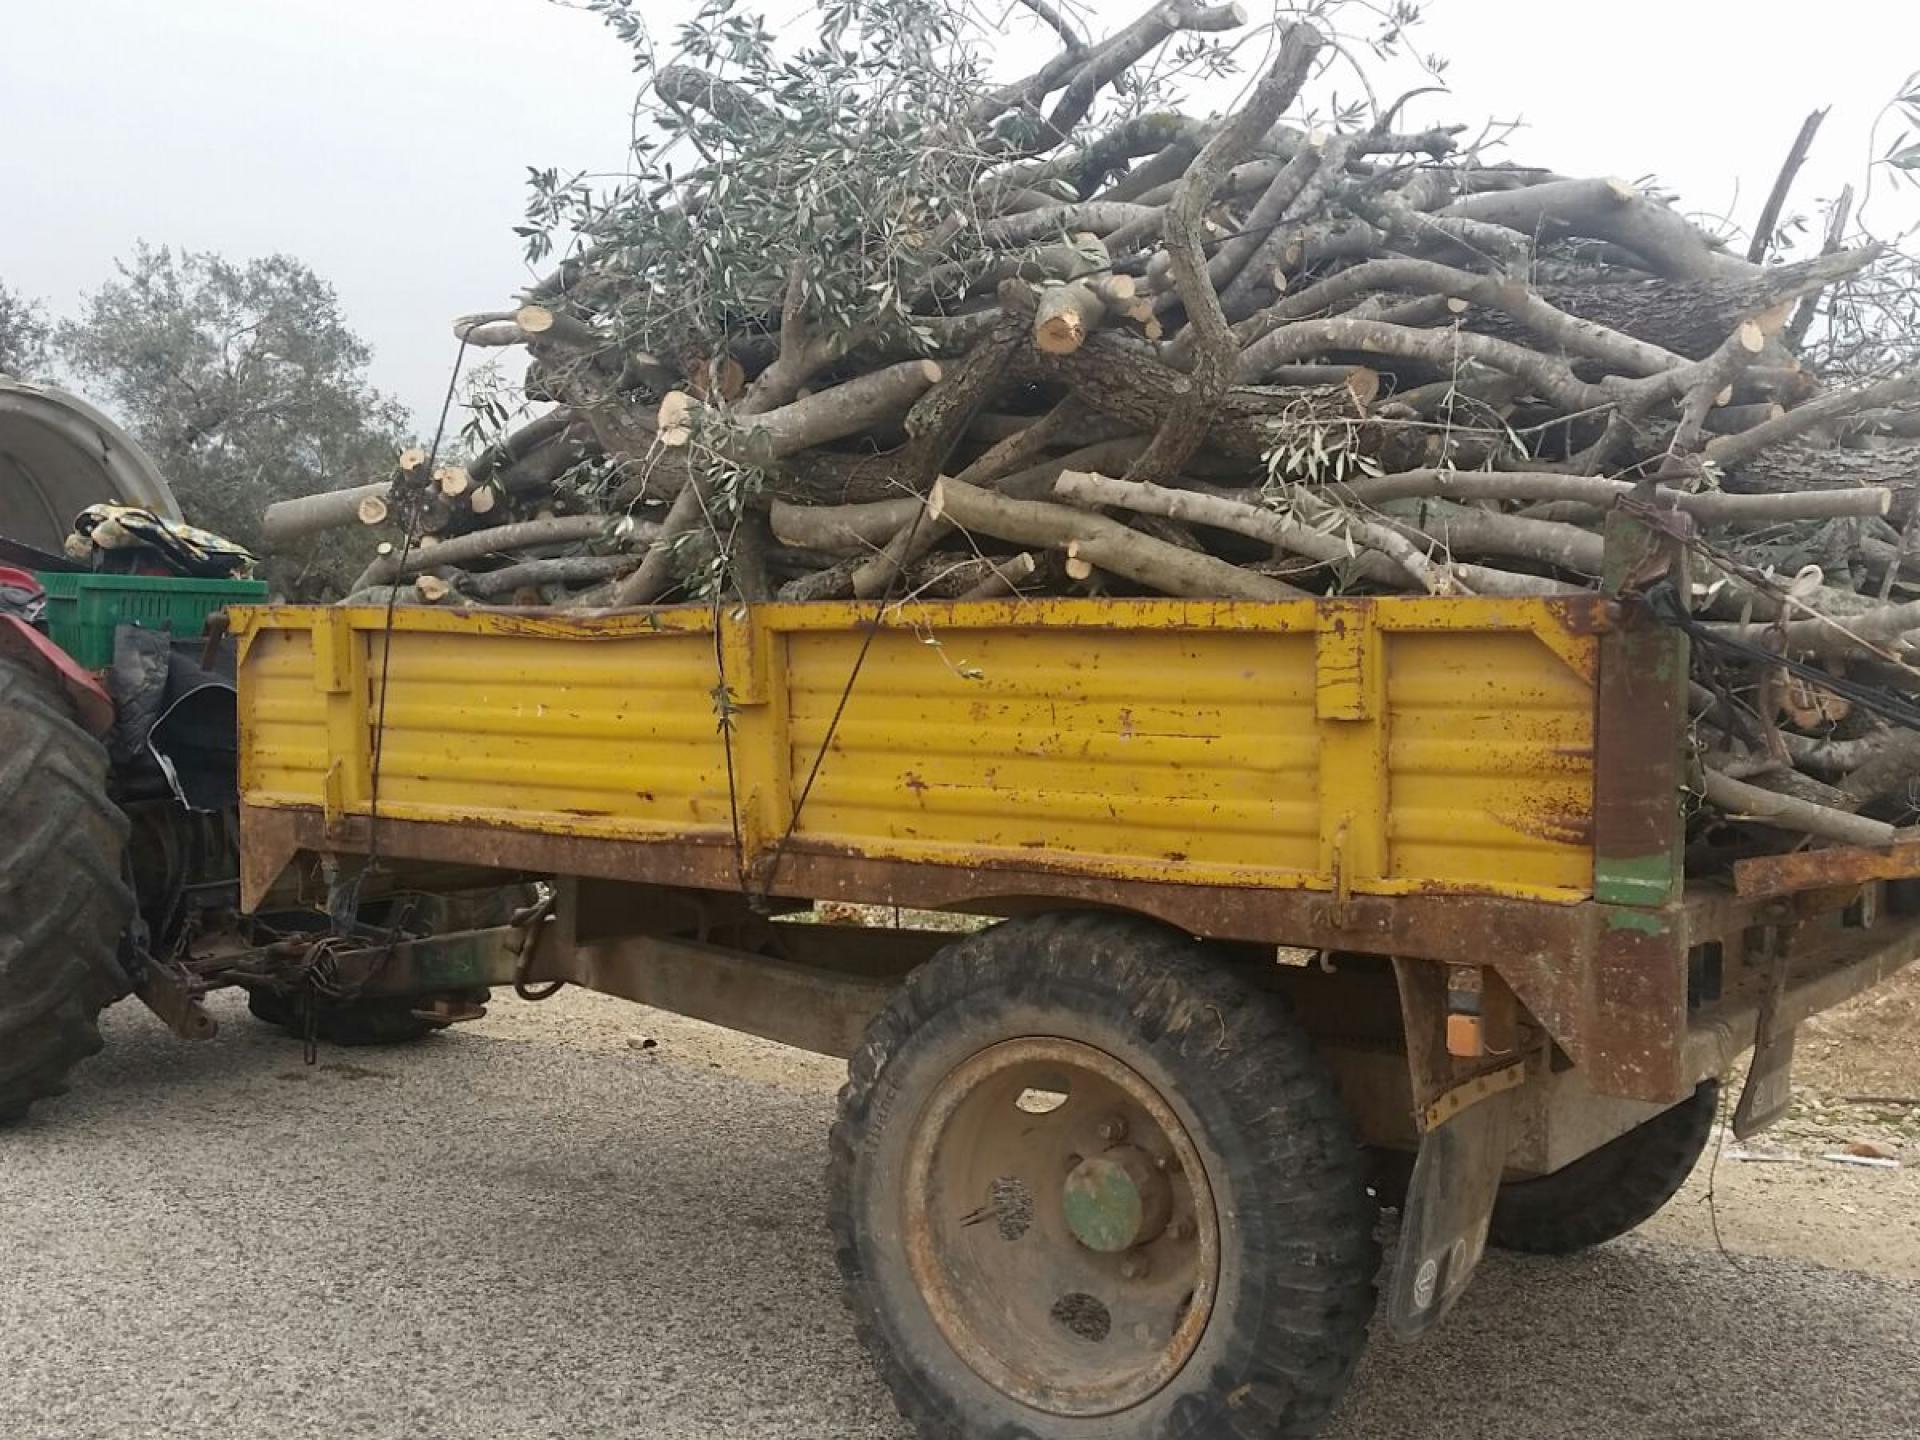 After the olive harvest is over people prune the trees and bring the wood home to heat their houses.